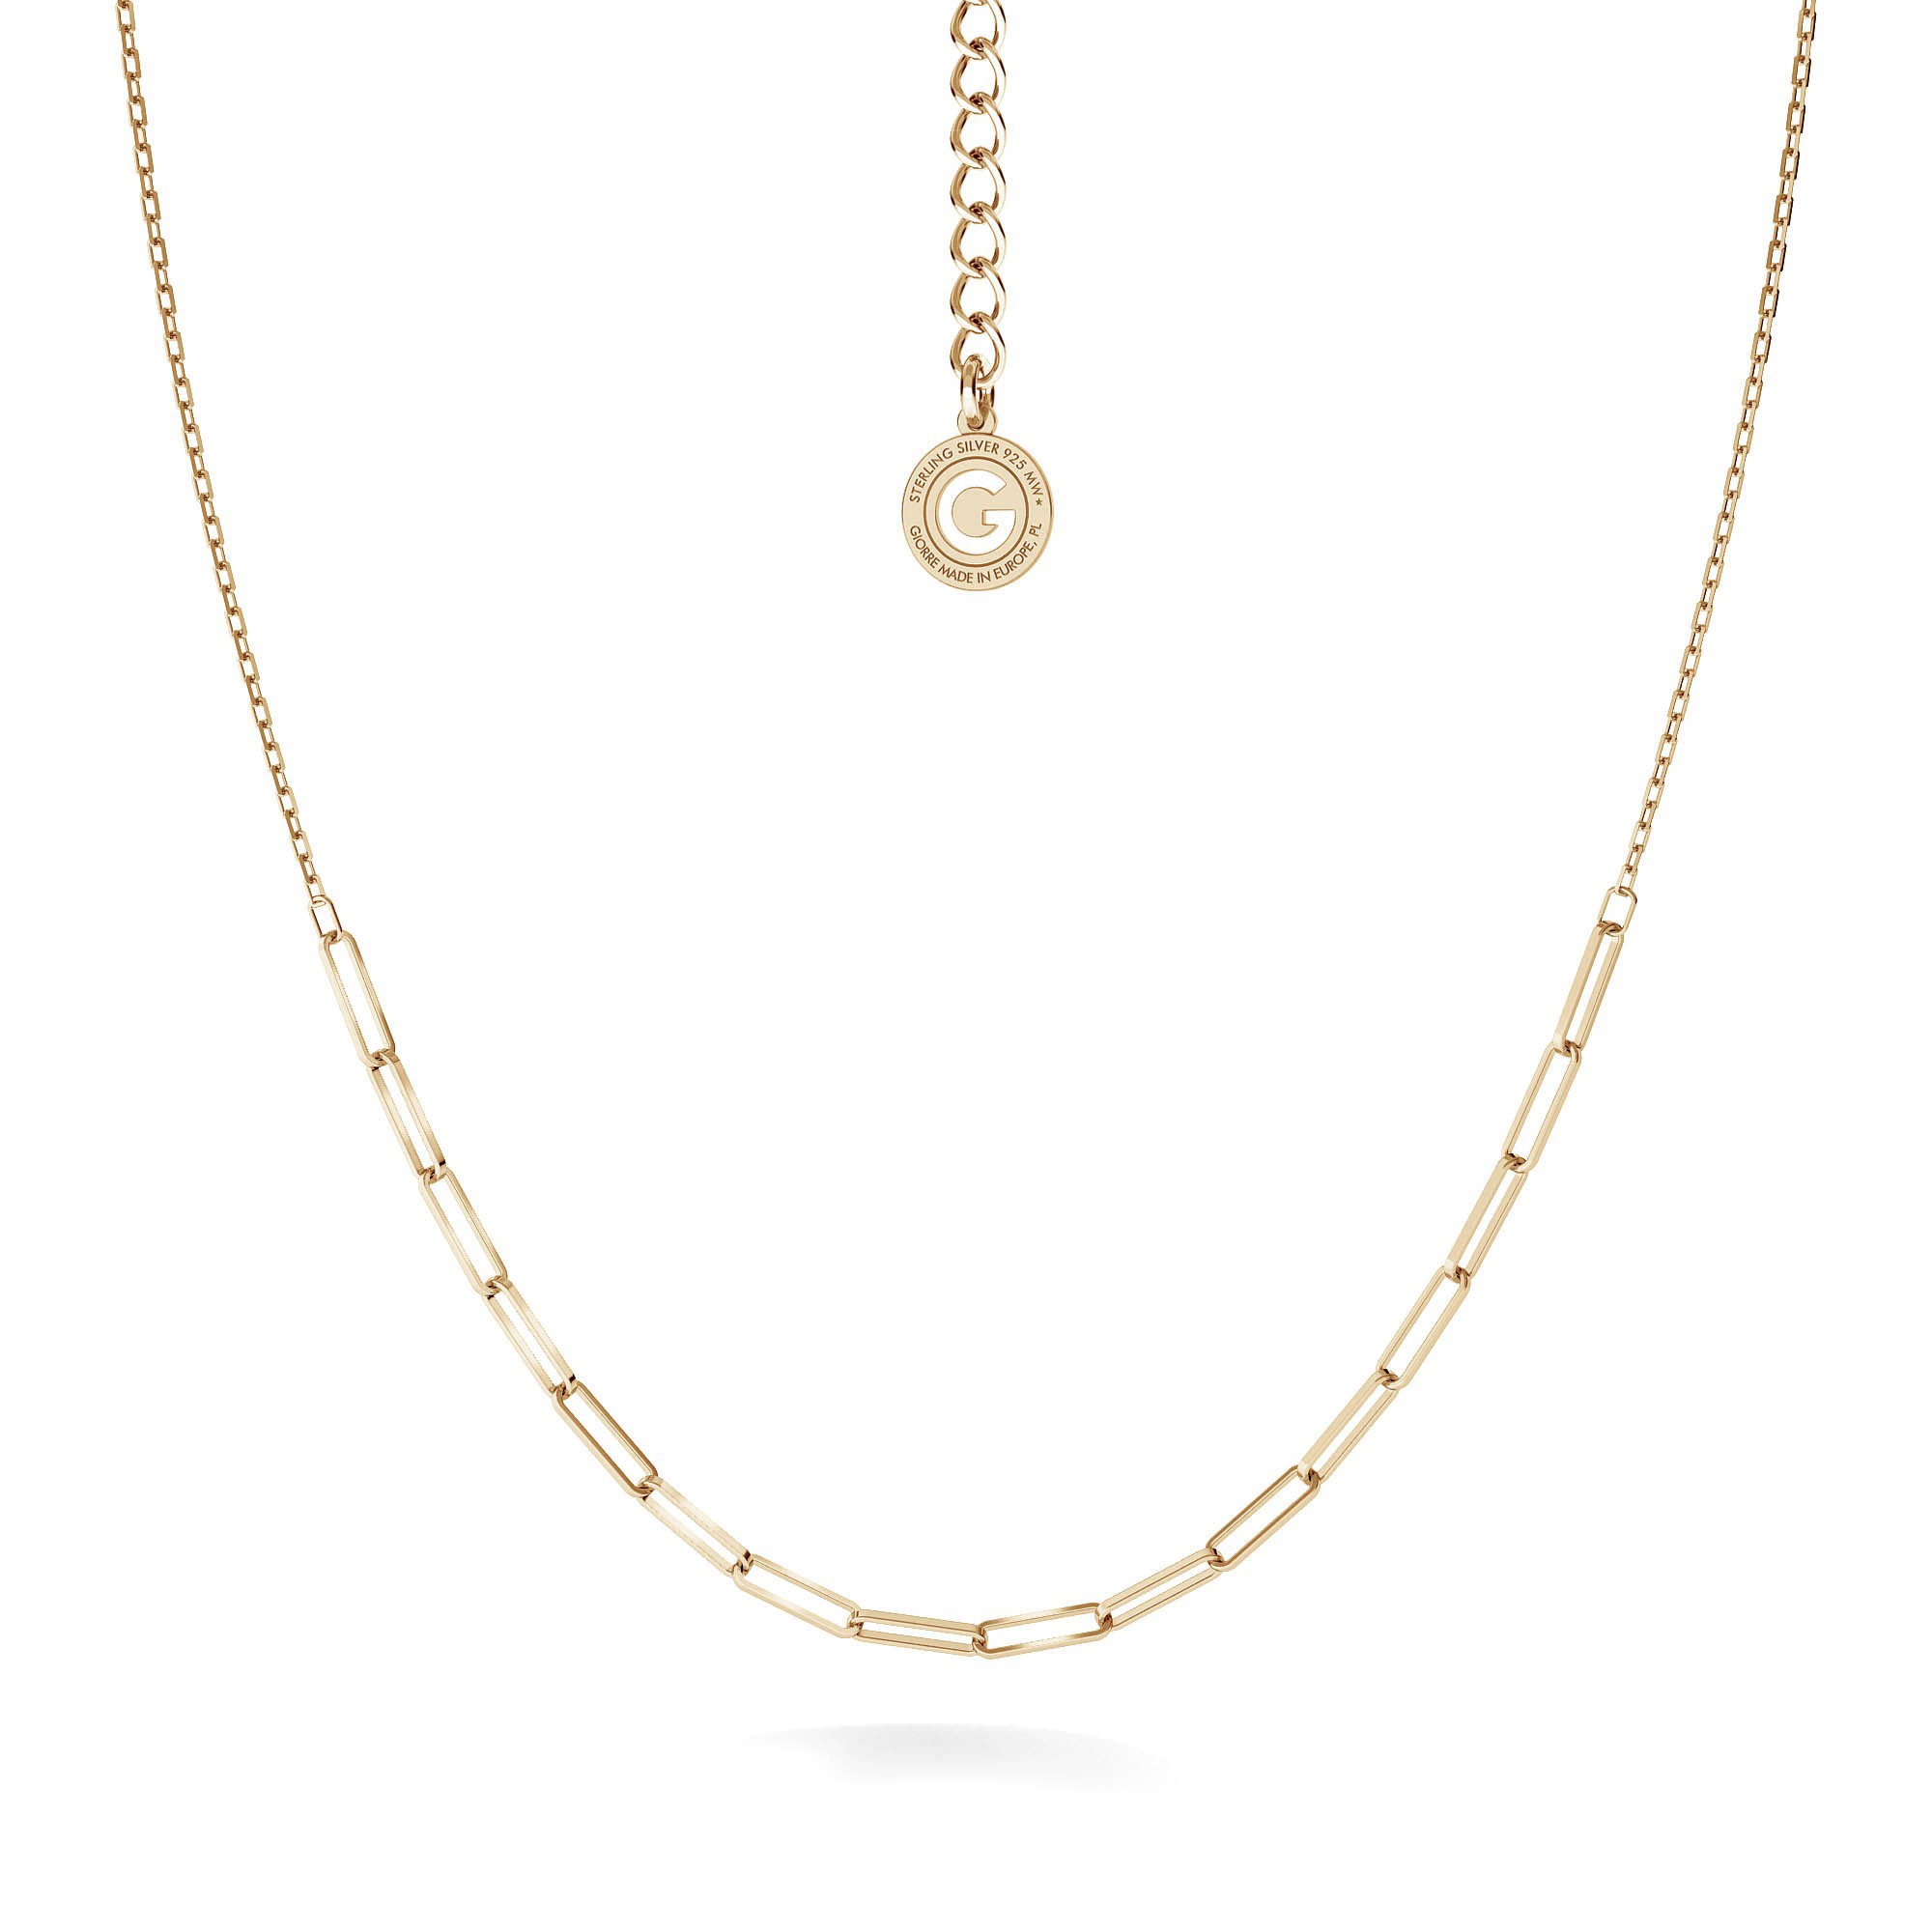 Giorre Woman's Necklace 34804